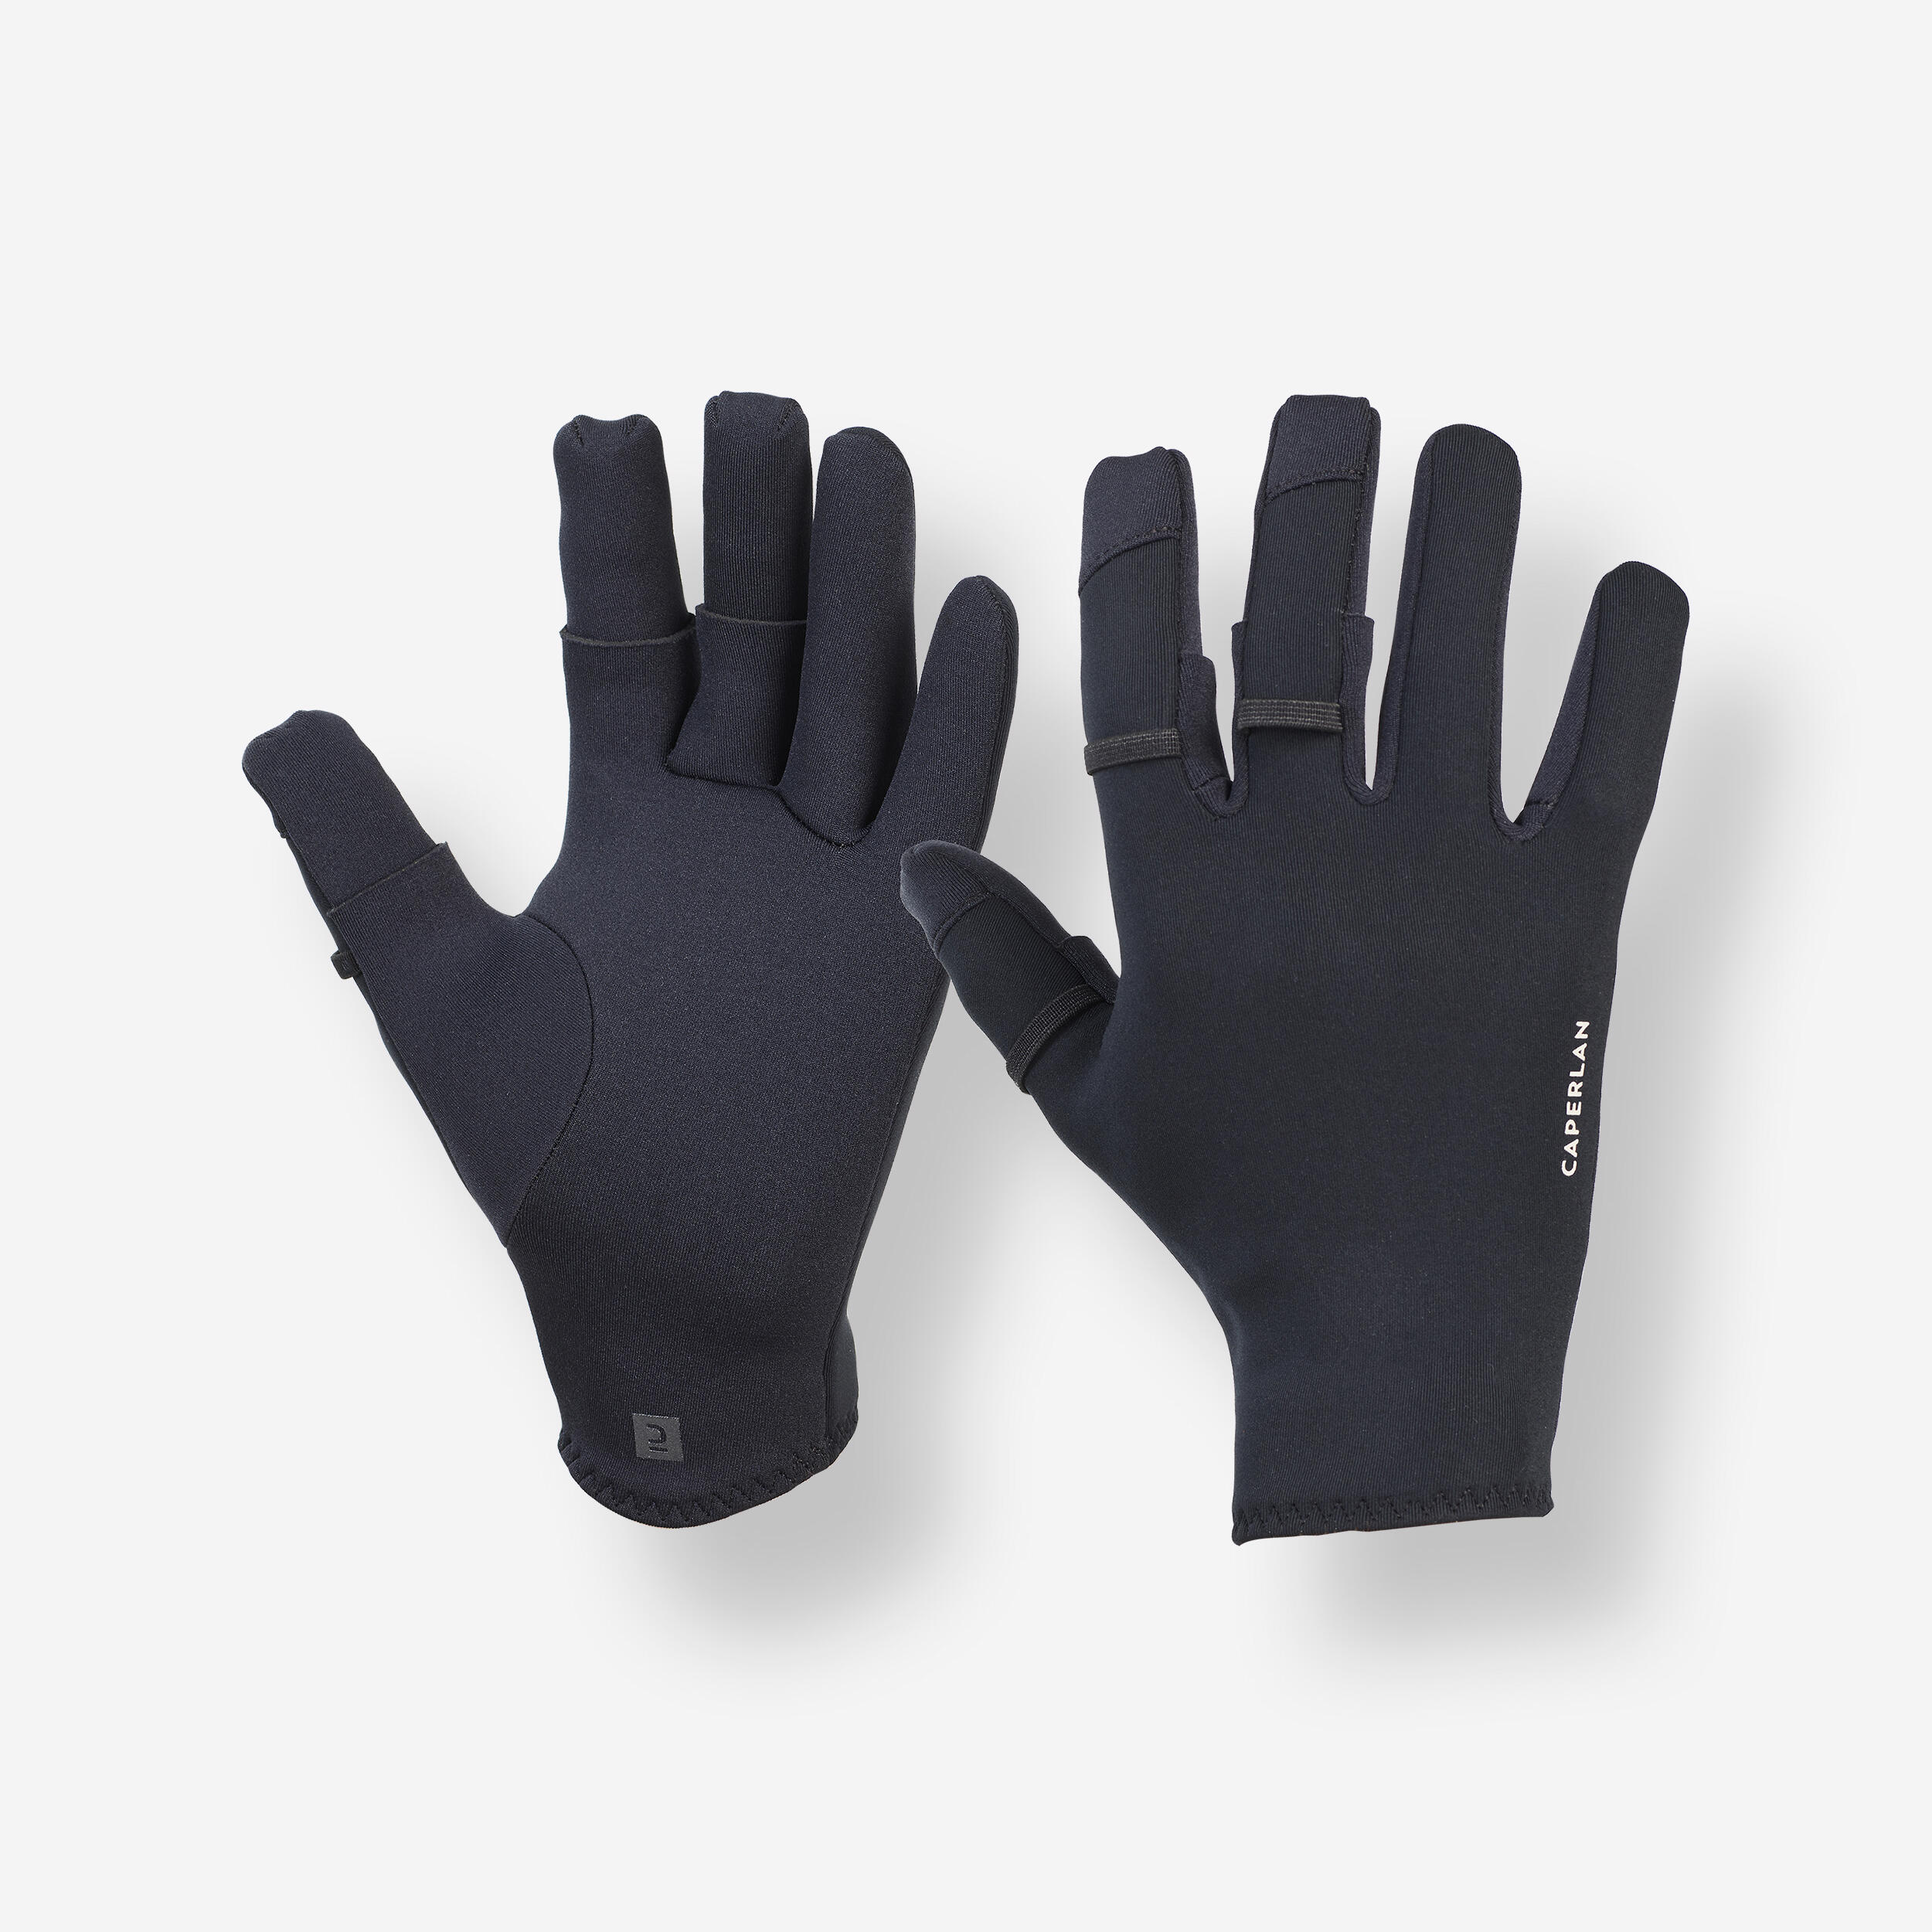 Fishing 1 mm neoprene gloves 500 thermo with 3 opening fingers